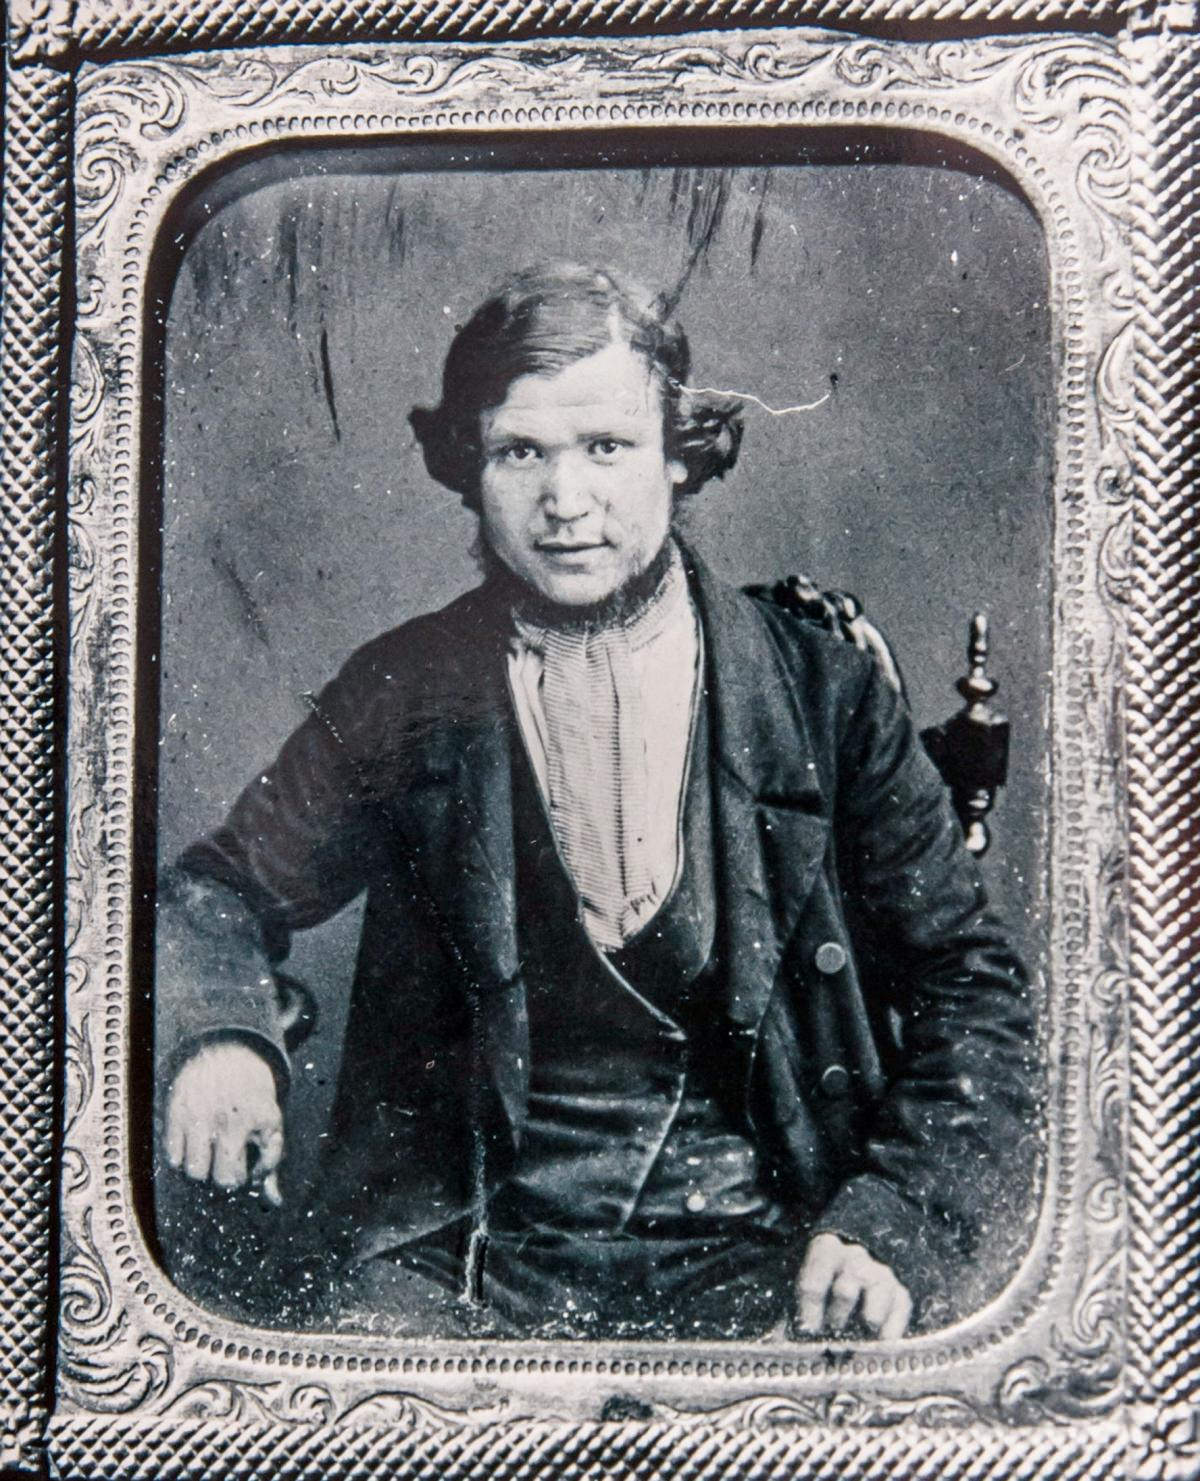 Mugshot of an unknown man taken some time between 1850 and 1870.